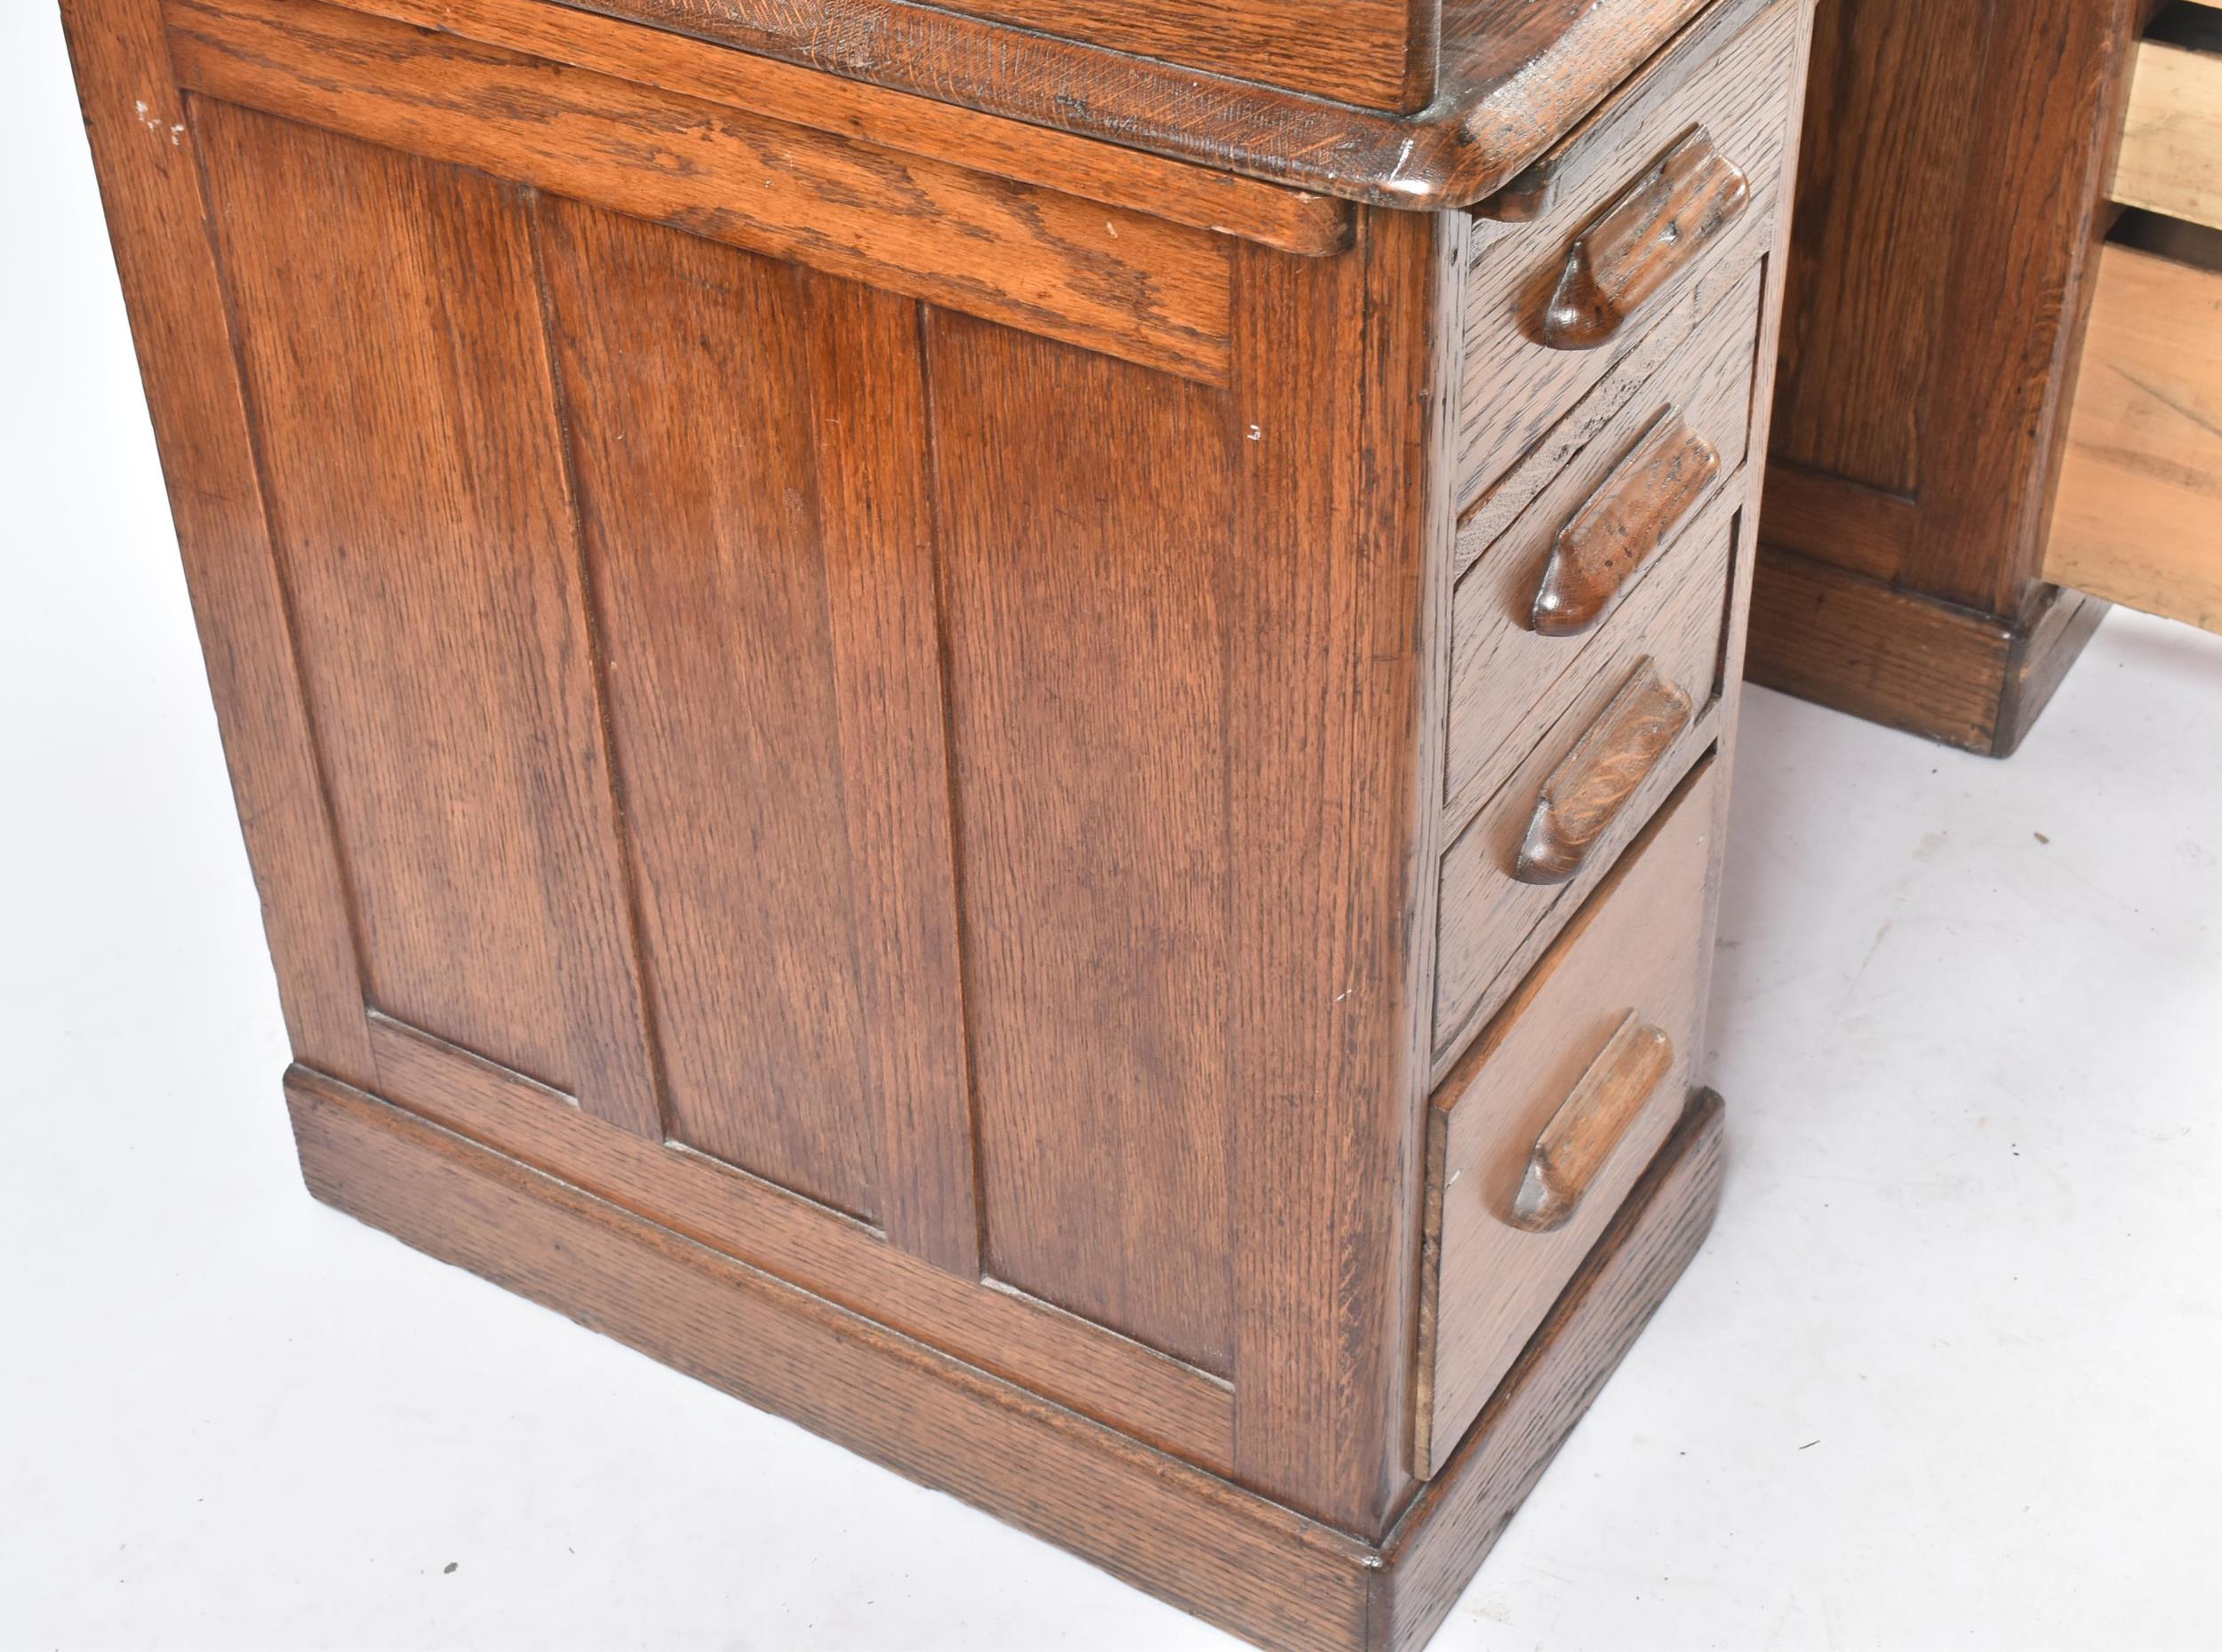 EARLY 20TH CENTURY 1920S OAK HILL'S FURNITURE ROLL TOP DESK - Image 5 of 6